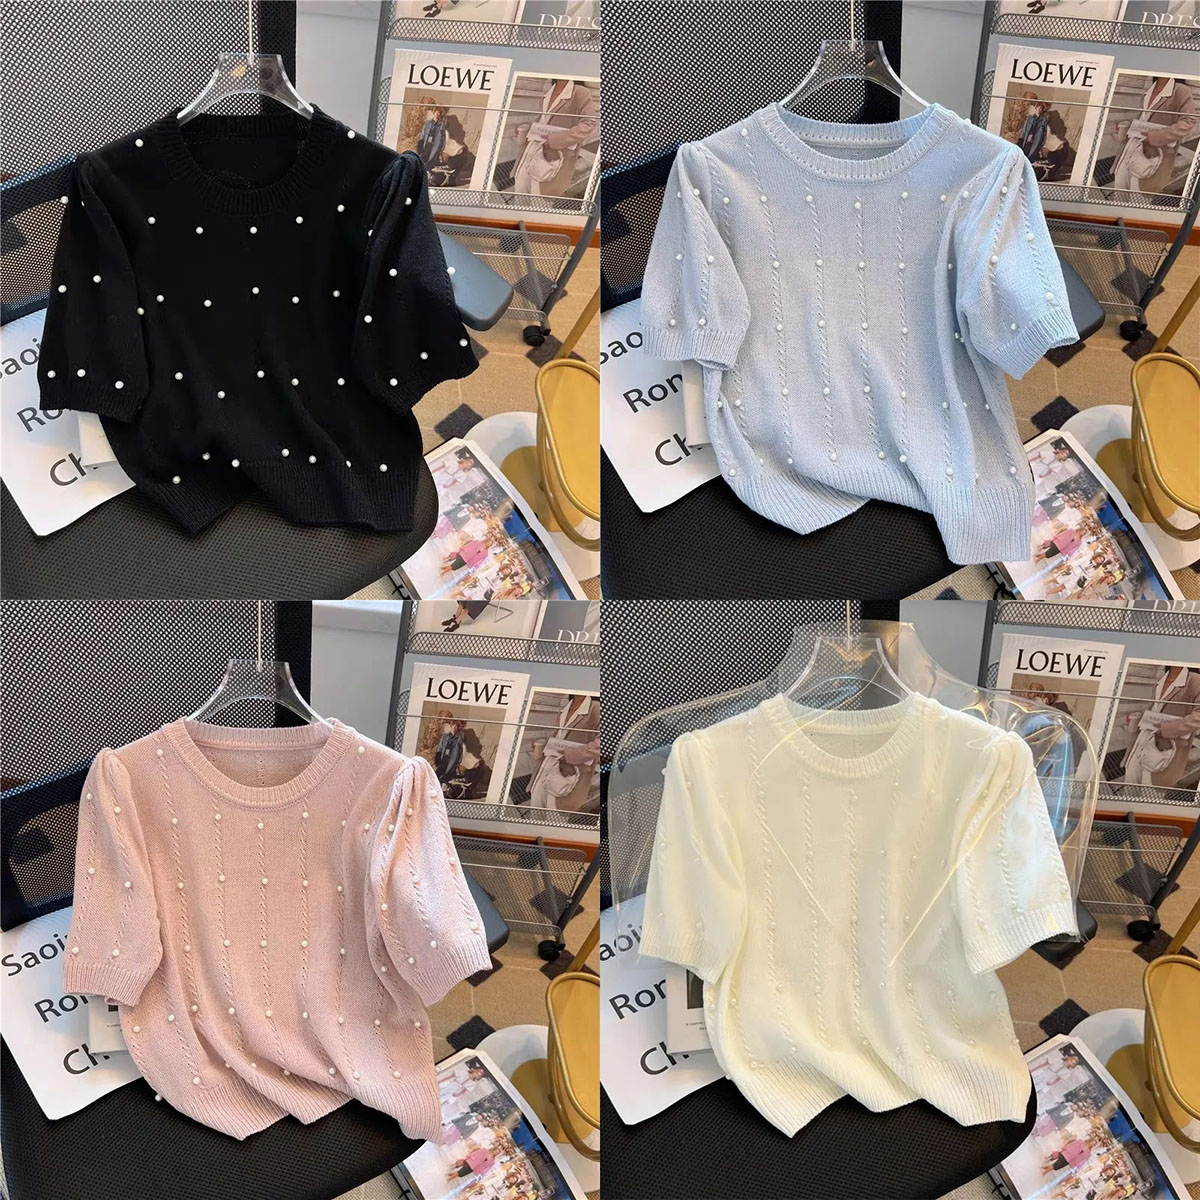 HF-SSVWP: Summer short-sleeved t-shirt ice silk sweater pearl round neck slim fit casual top